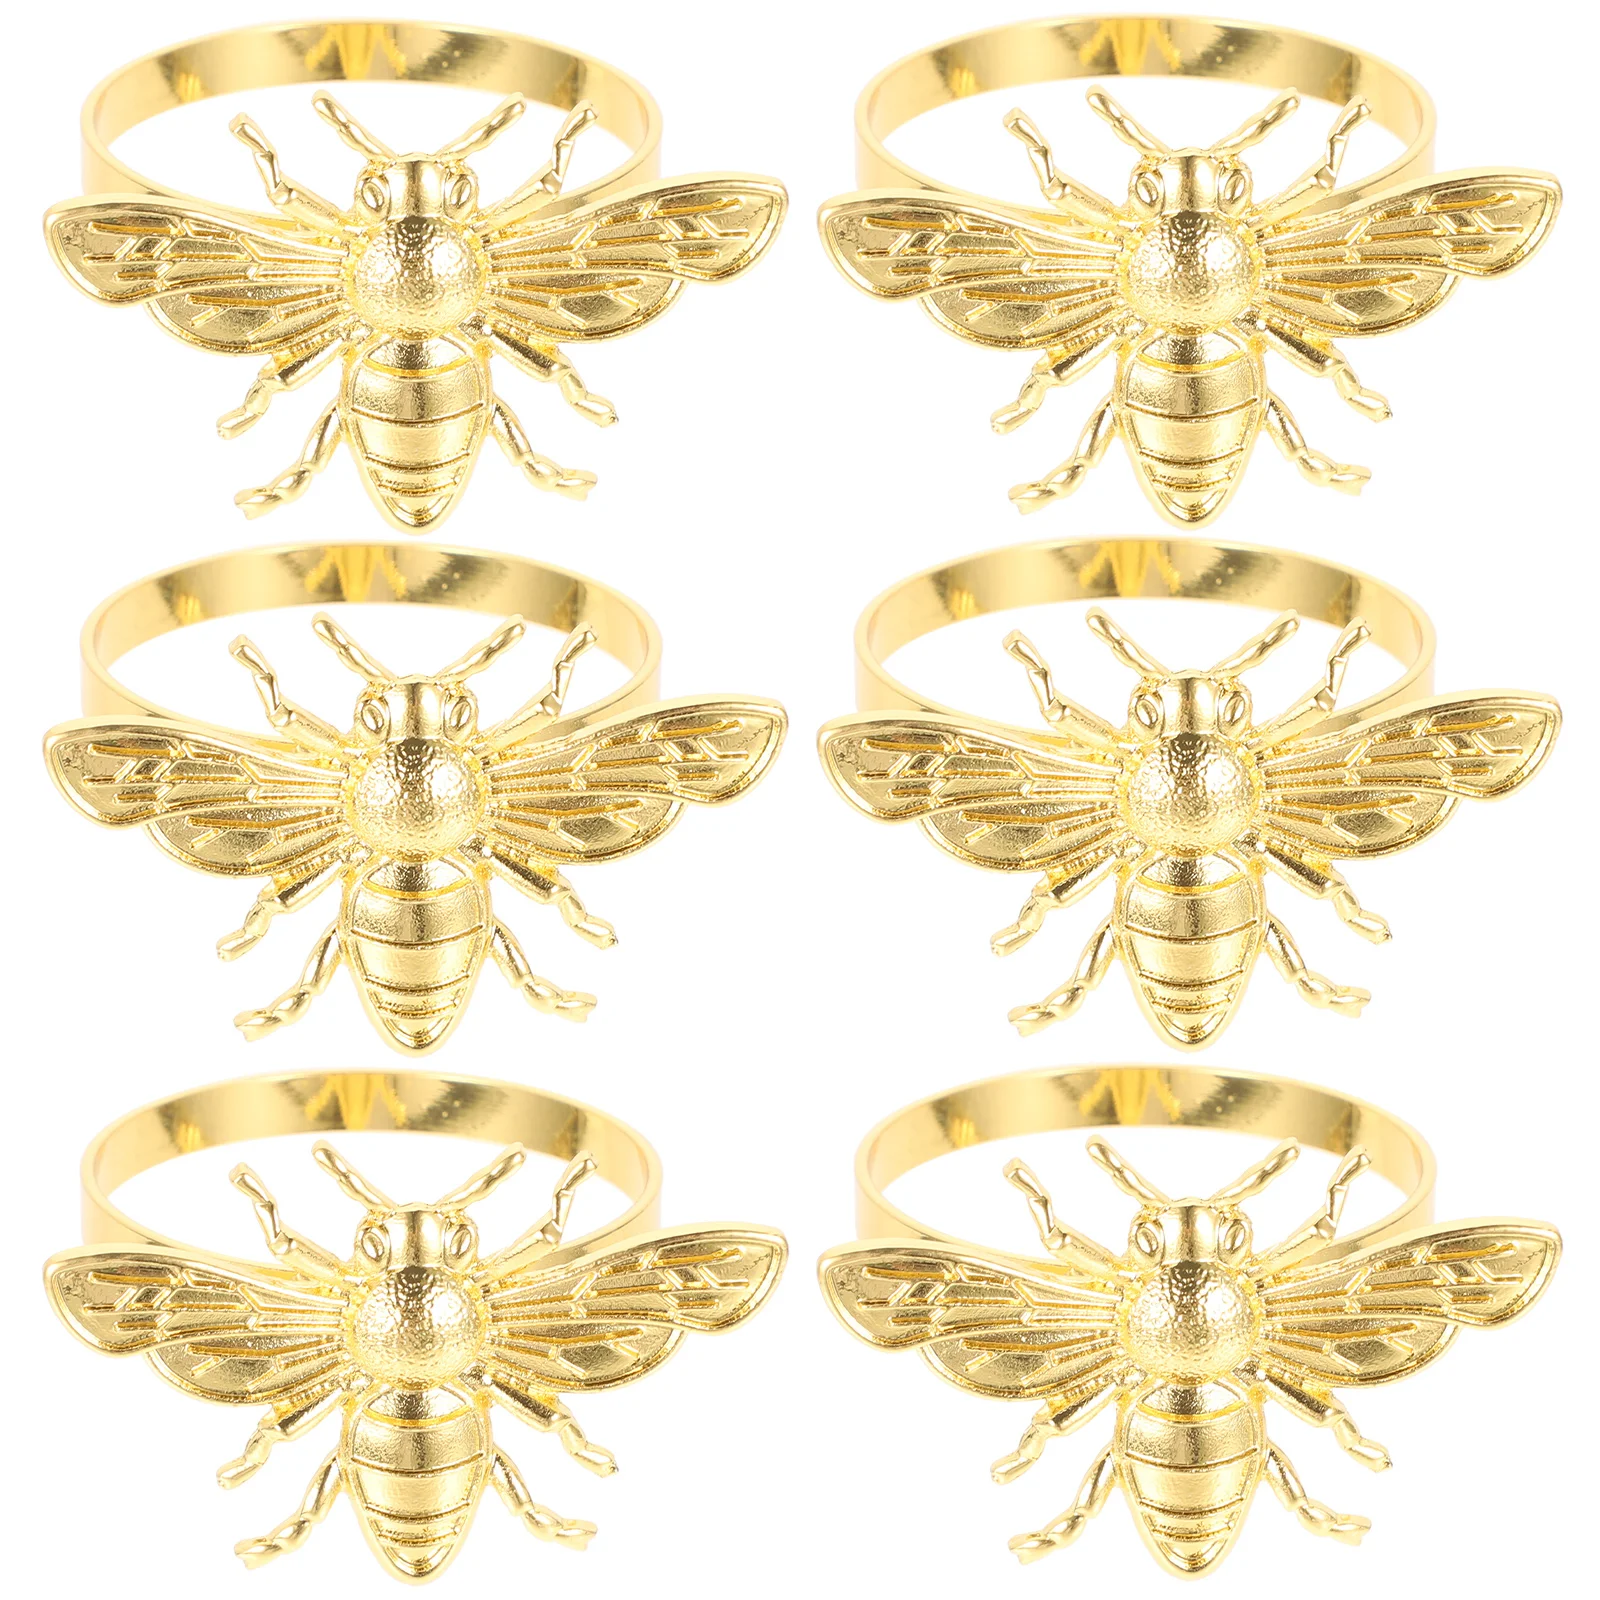 

6 Pcs Bee Napkin Rings Table Decoration Spring Clasp Holder Gold Paper Towel Dinner Decors Shaped Buckles Tissue Decorative